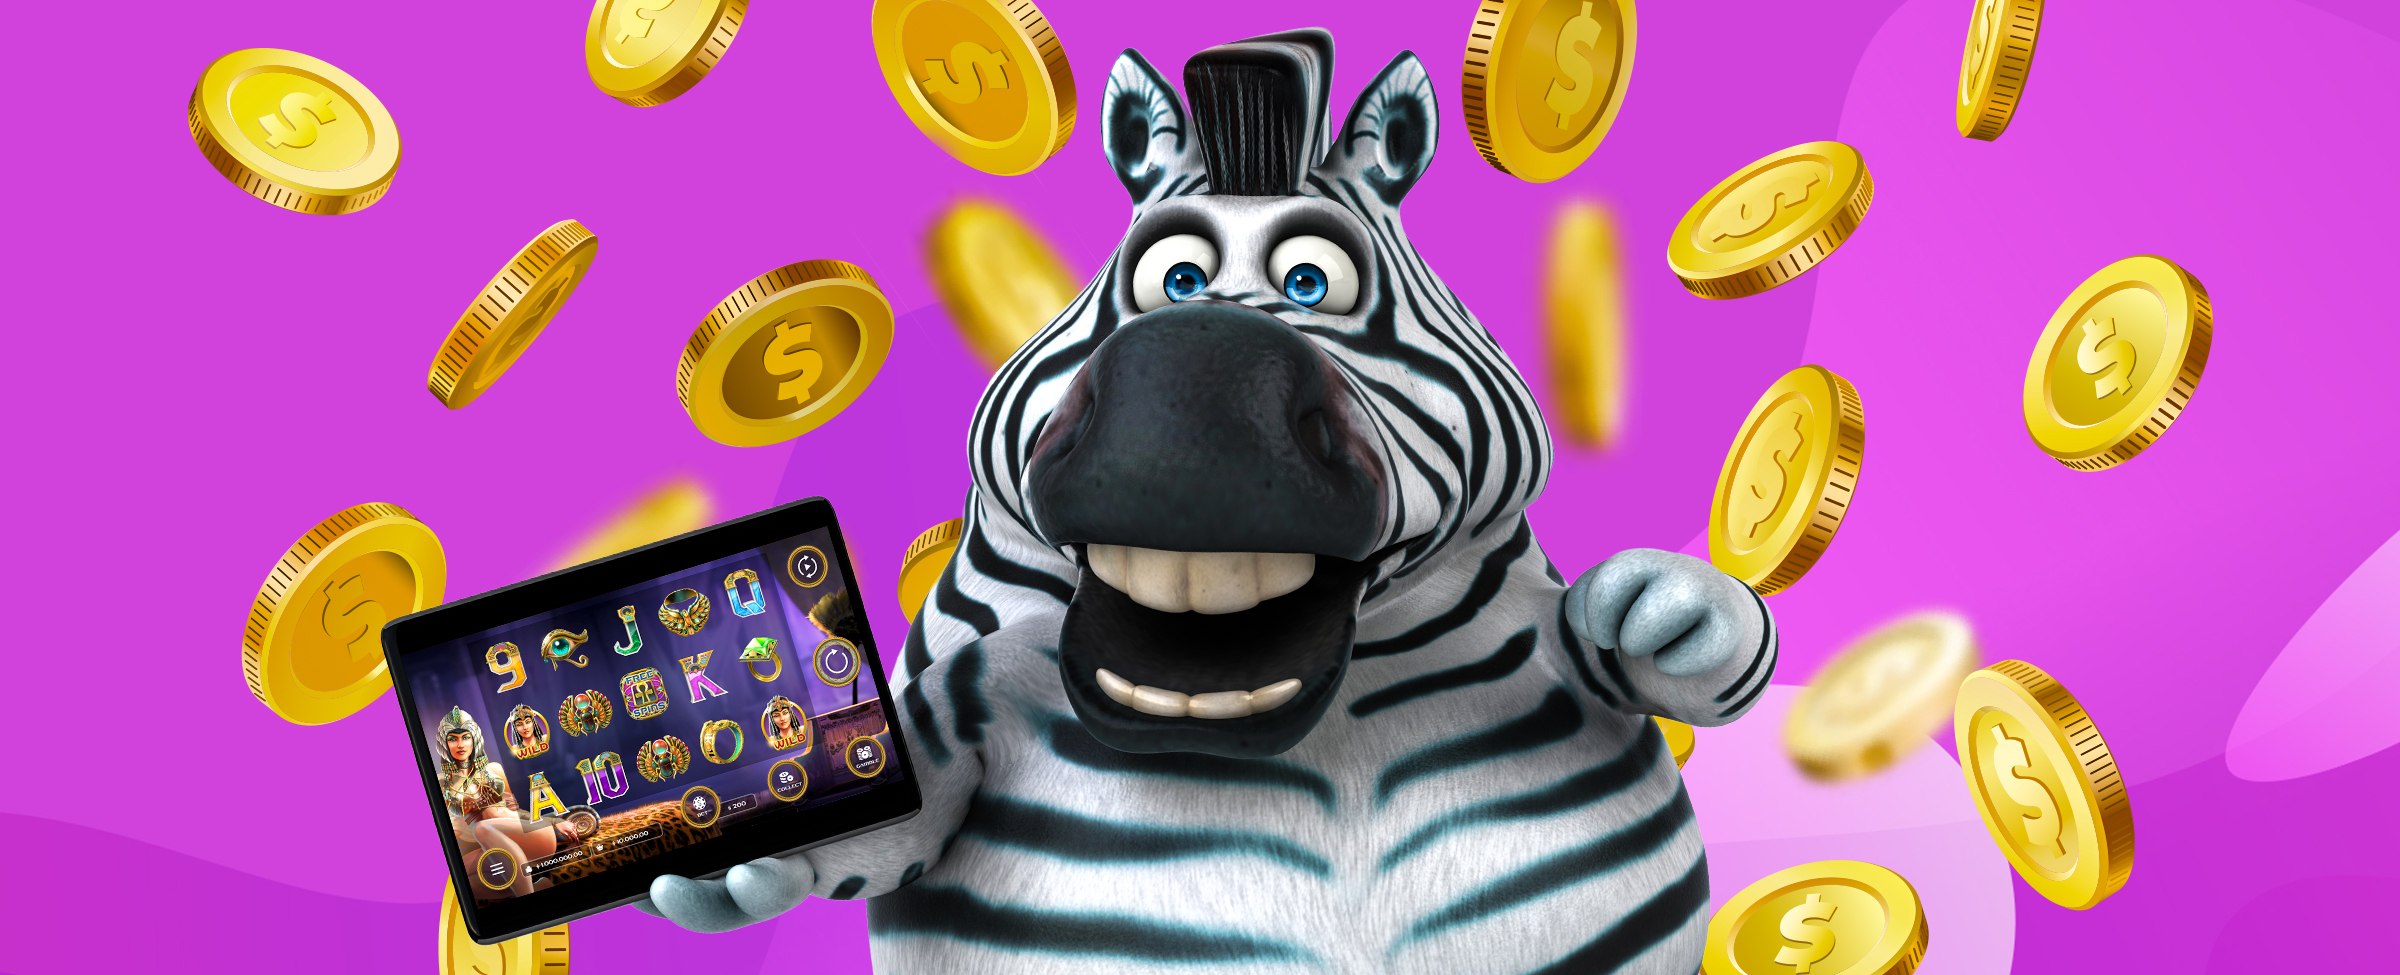 Your search is over, because here is the ultimate guide on playing online slots for real money. Let SlotsLV walk you through all you need to know.